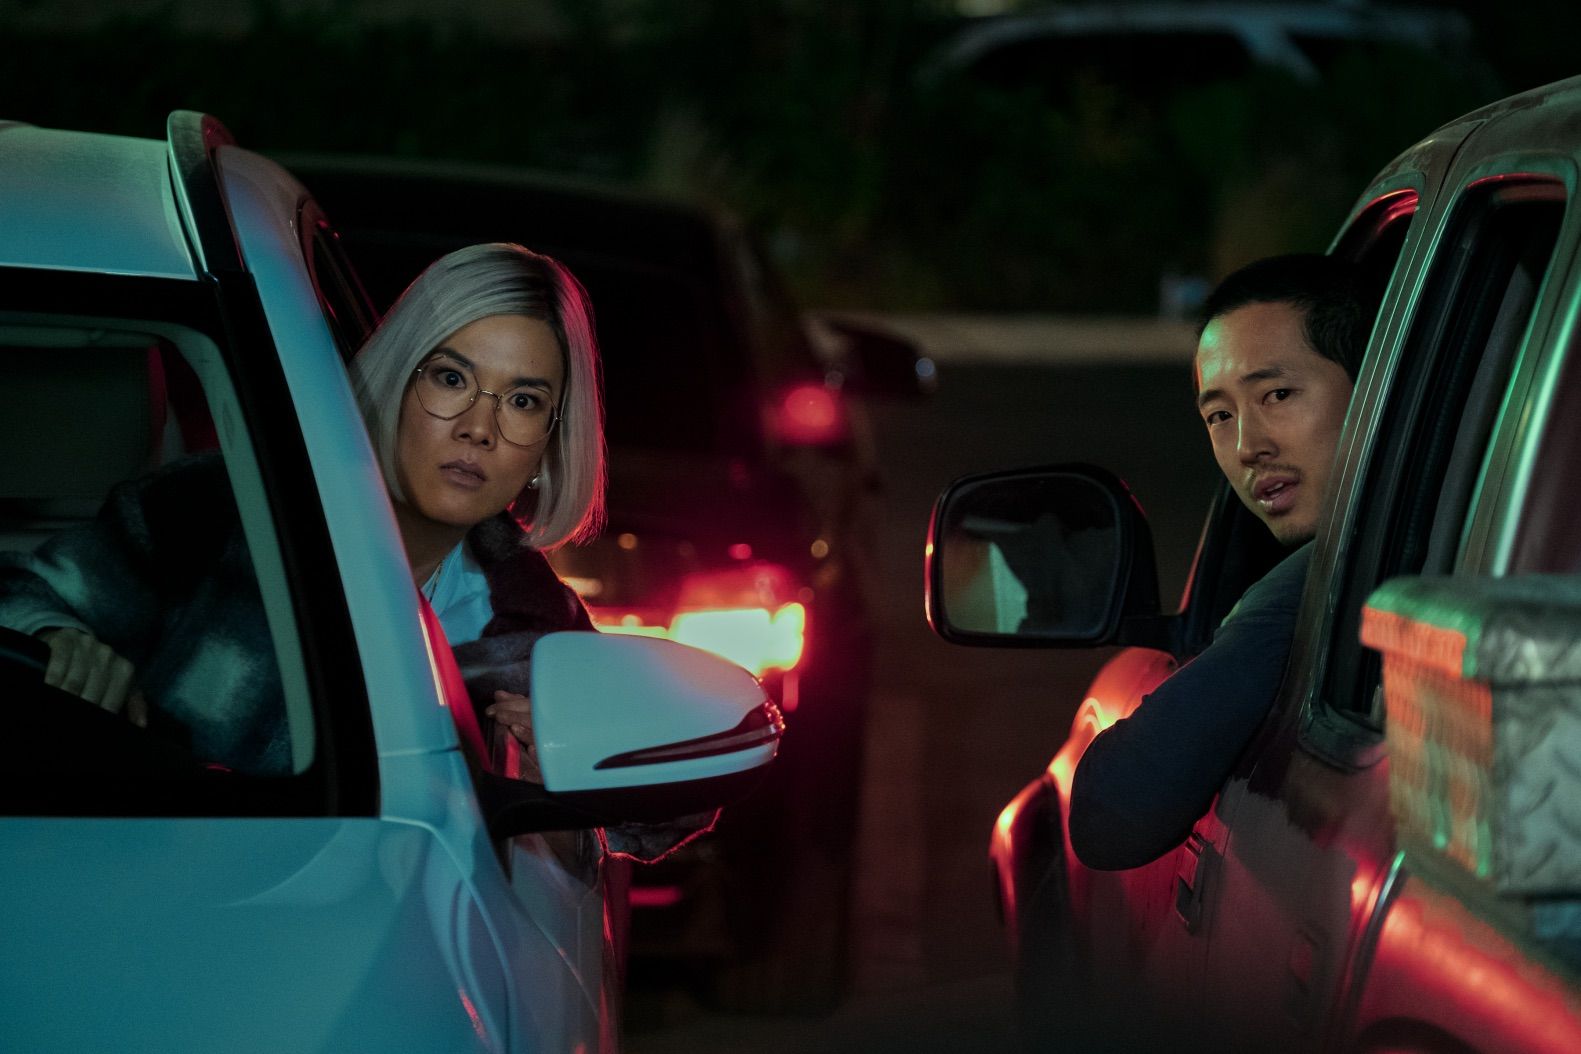 Ali Wong and Steven Yeun hang their heads outside car windows during an altercation.